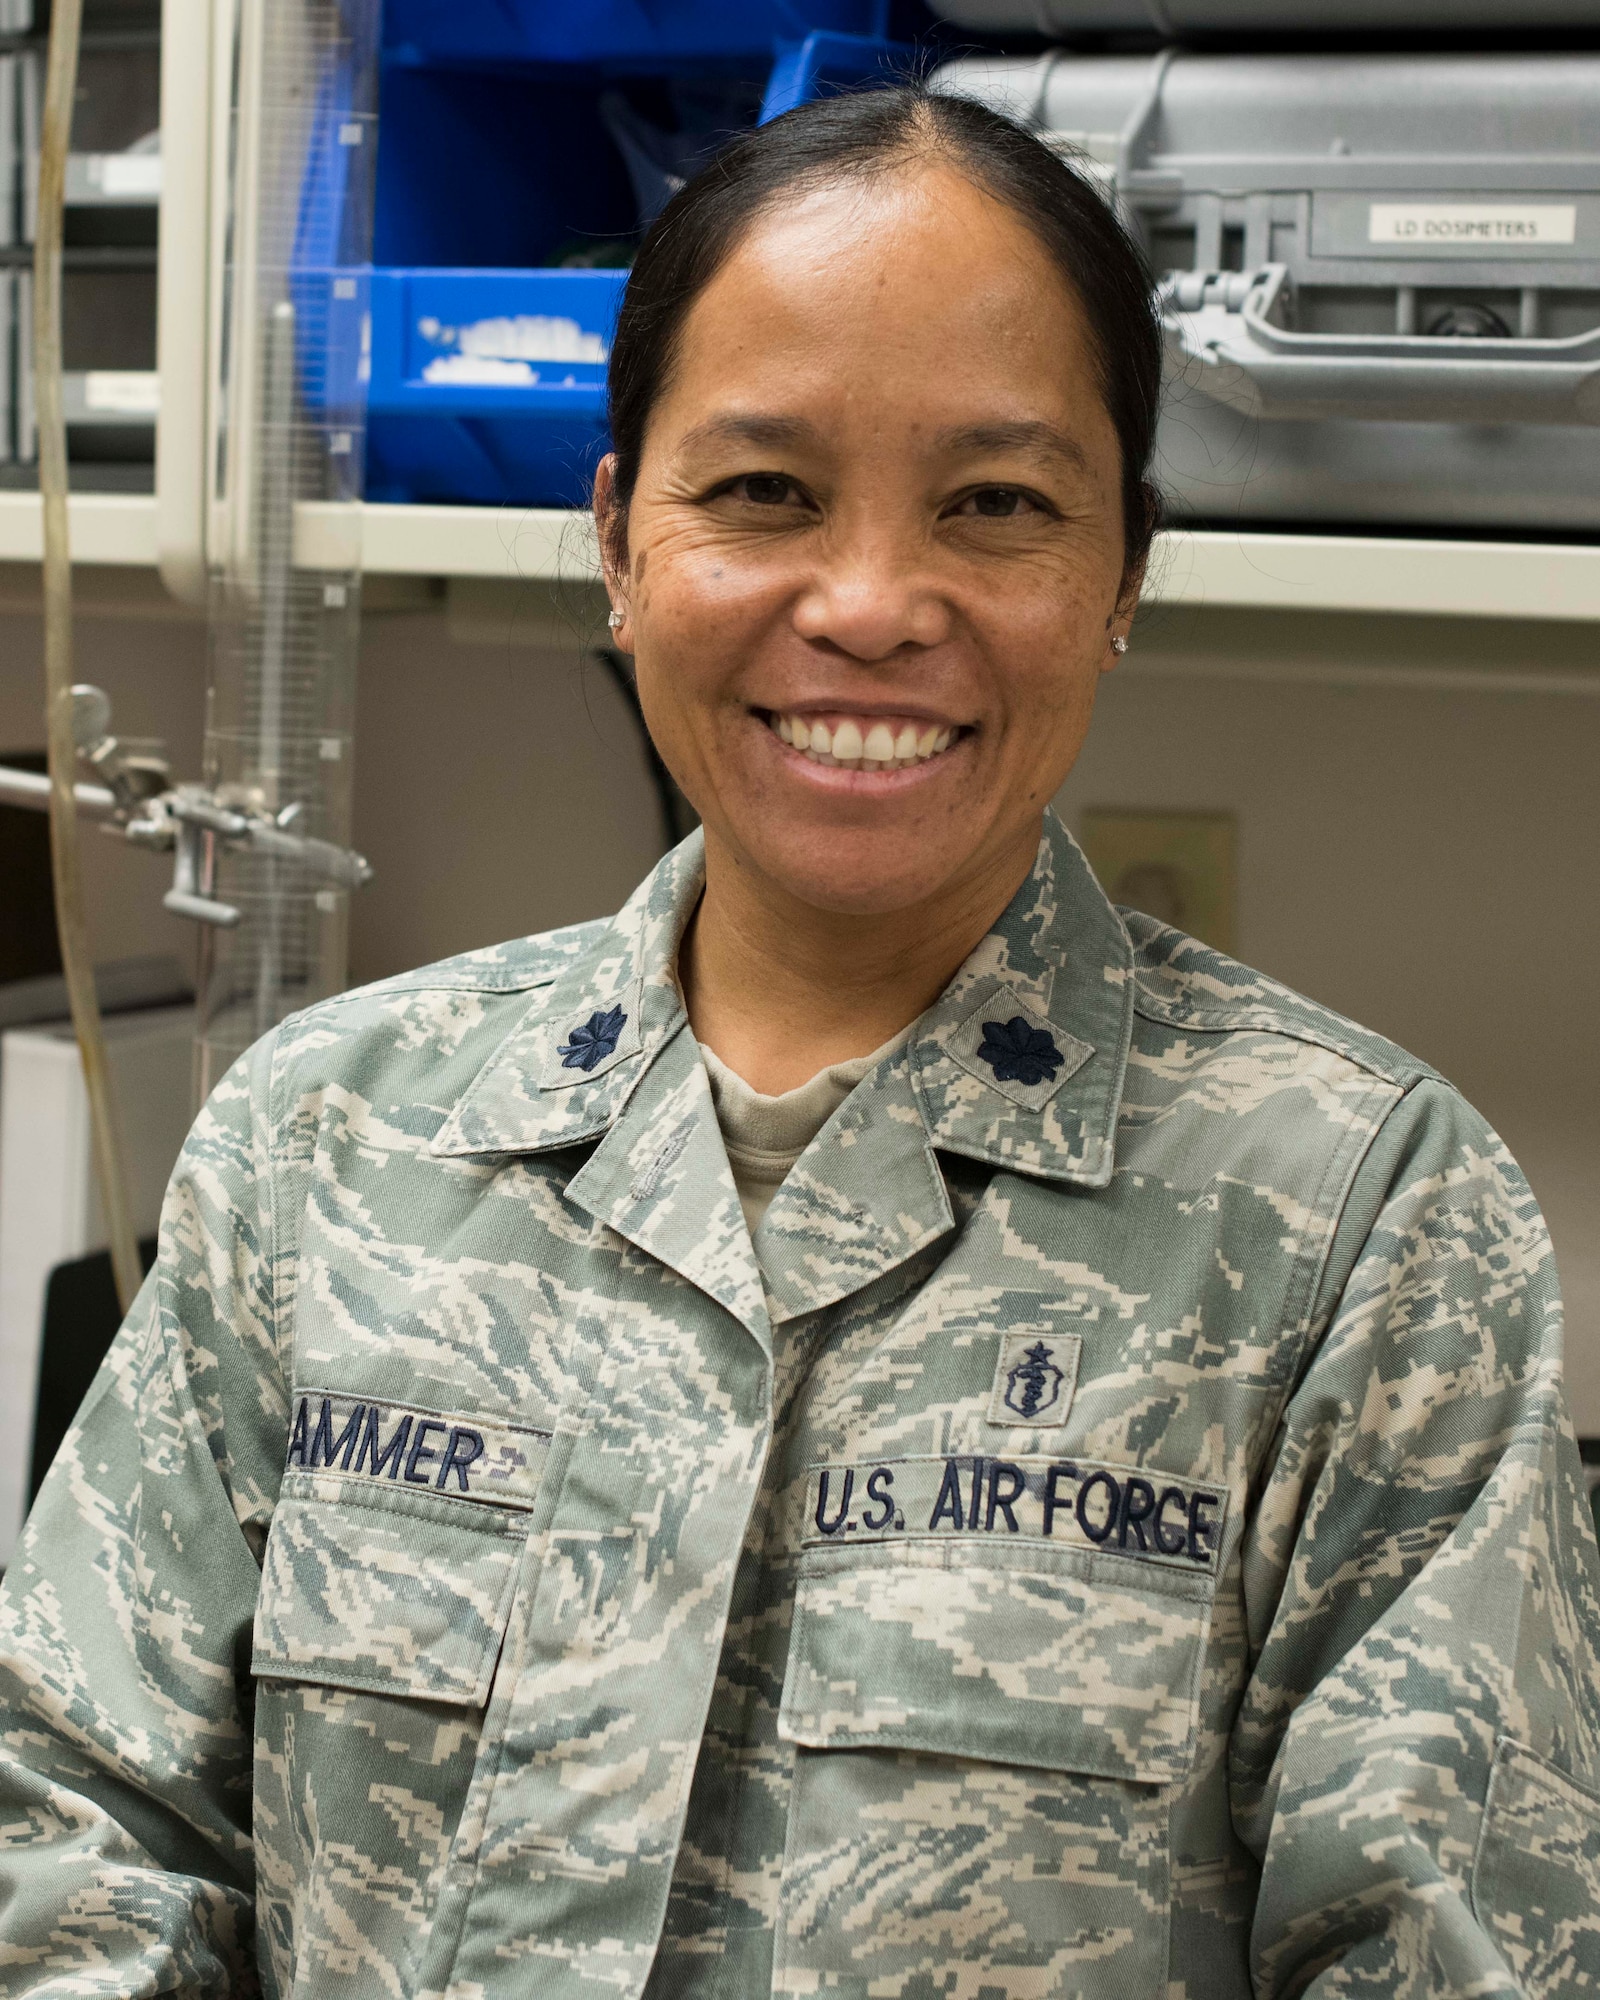 Lt. Col. Elisa Hammer, 49th Medical Group Biomedical Engineering flight commander, poses for a photo, Jan. 11, 2019, on Holloman Air Force Base, N.M. Holloman’s bioenvironmental engineers advise commanders on heath assessment operations regarding their work centers, and monitor the use of hazardous materials as well as the presence of chemical, biological, radiological or nuclear materials. (U.S. Air Force photo by Staff Sgt. BreeAnn Sachs)